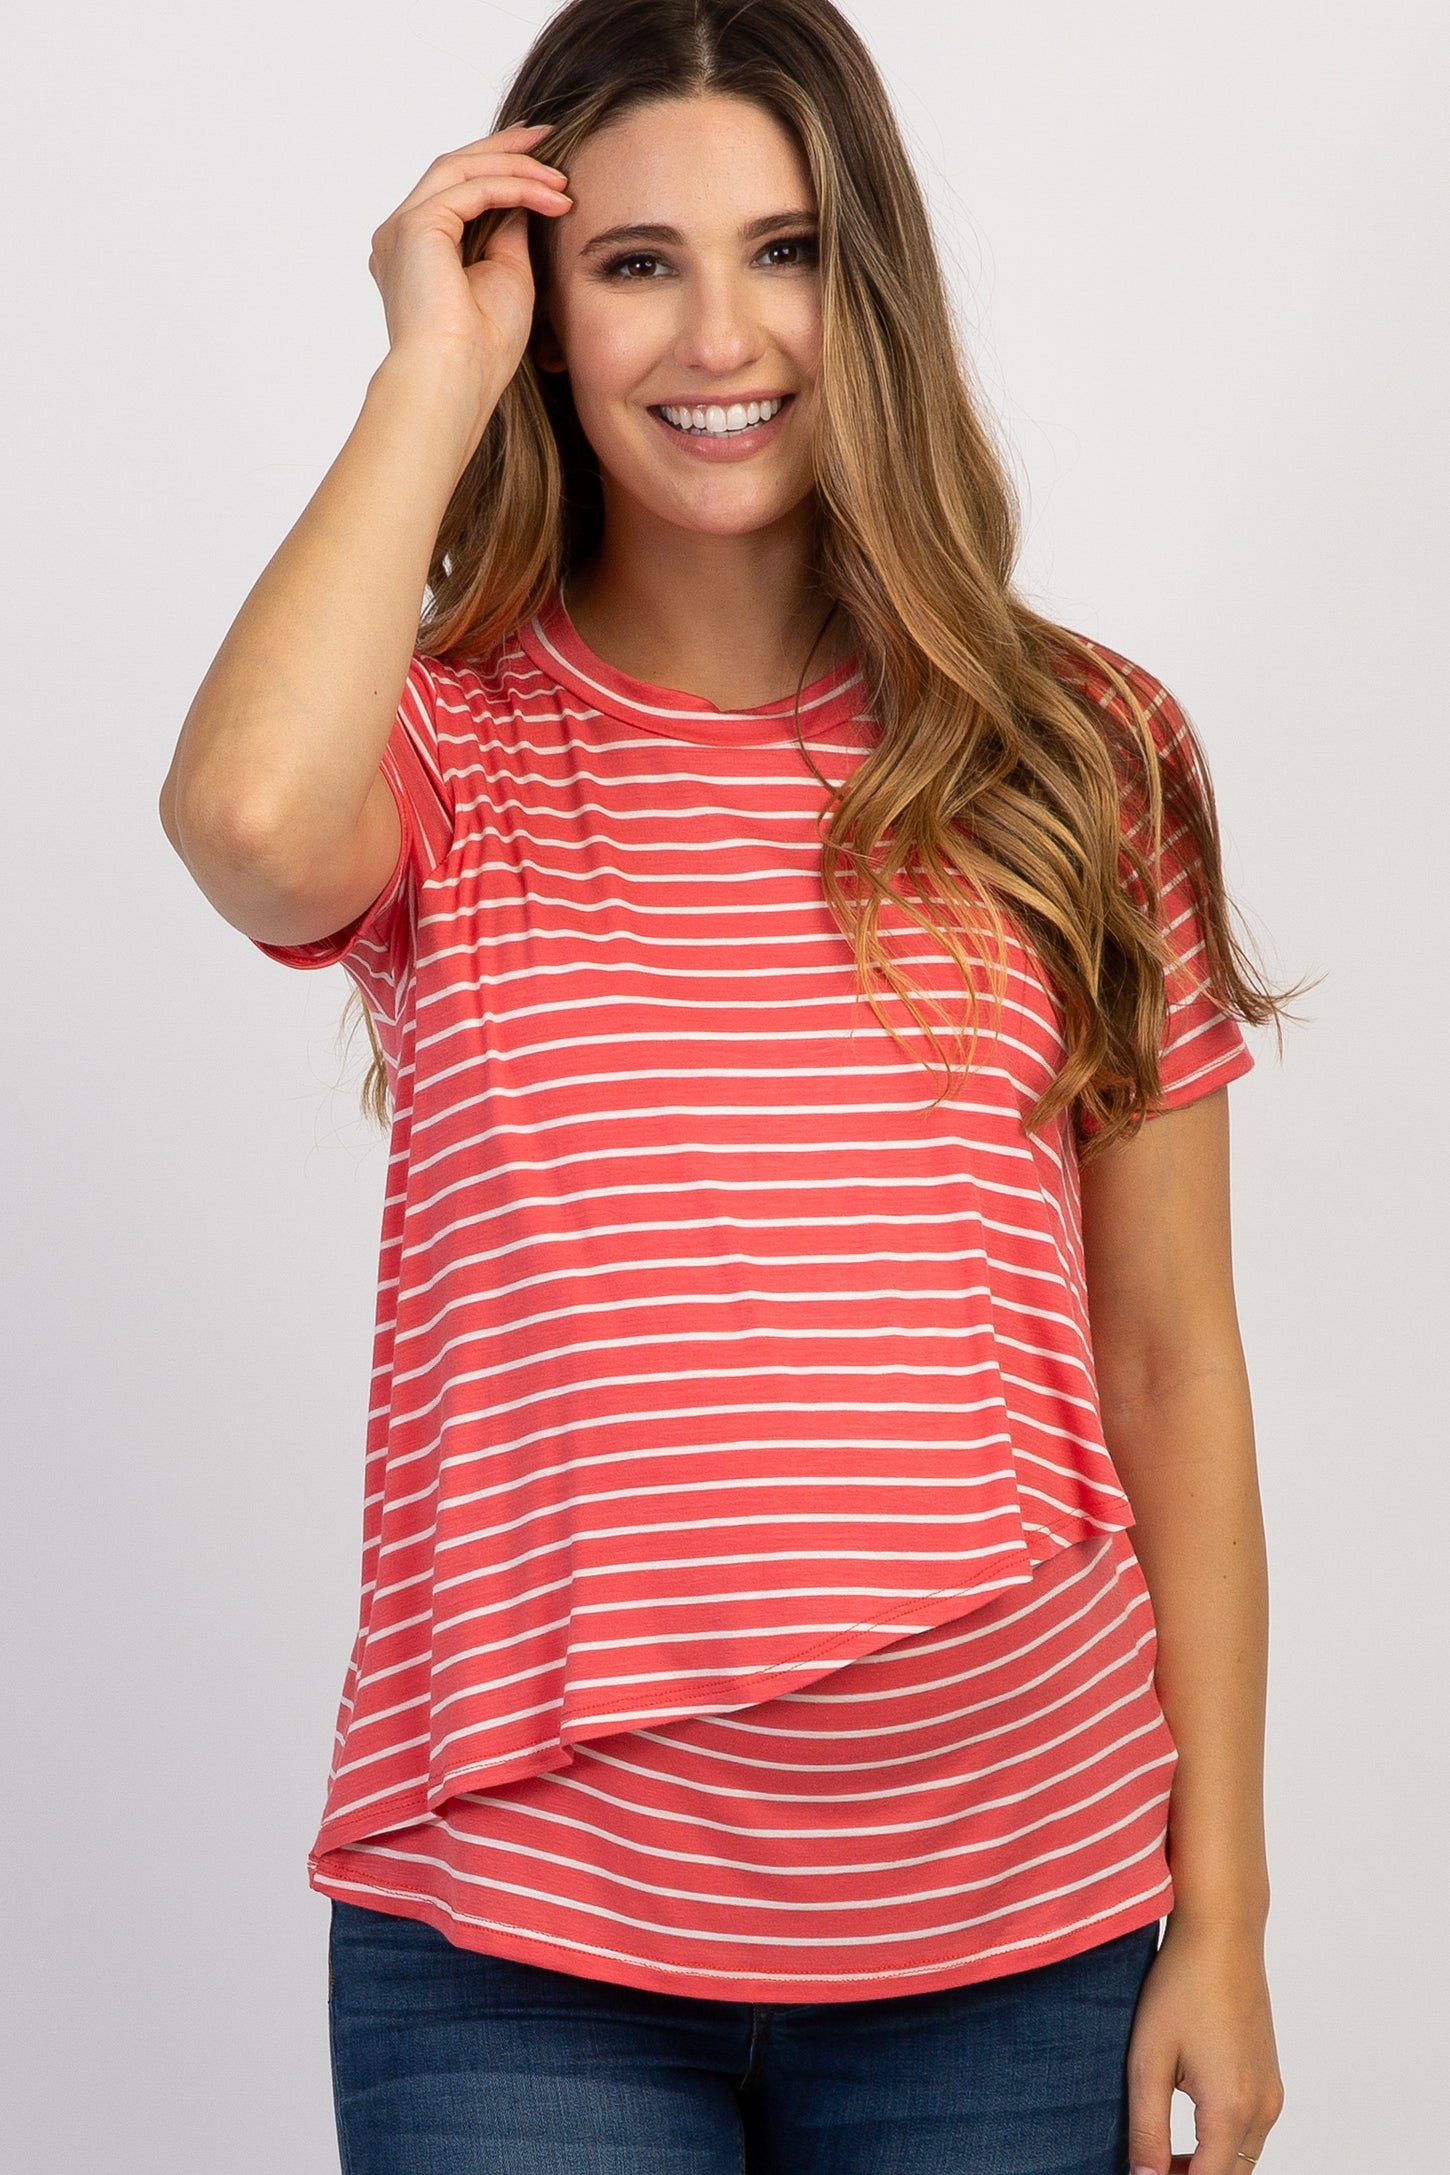 PinkBlush Coral Striped Layered Wrap Front Maternity Nursing Top